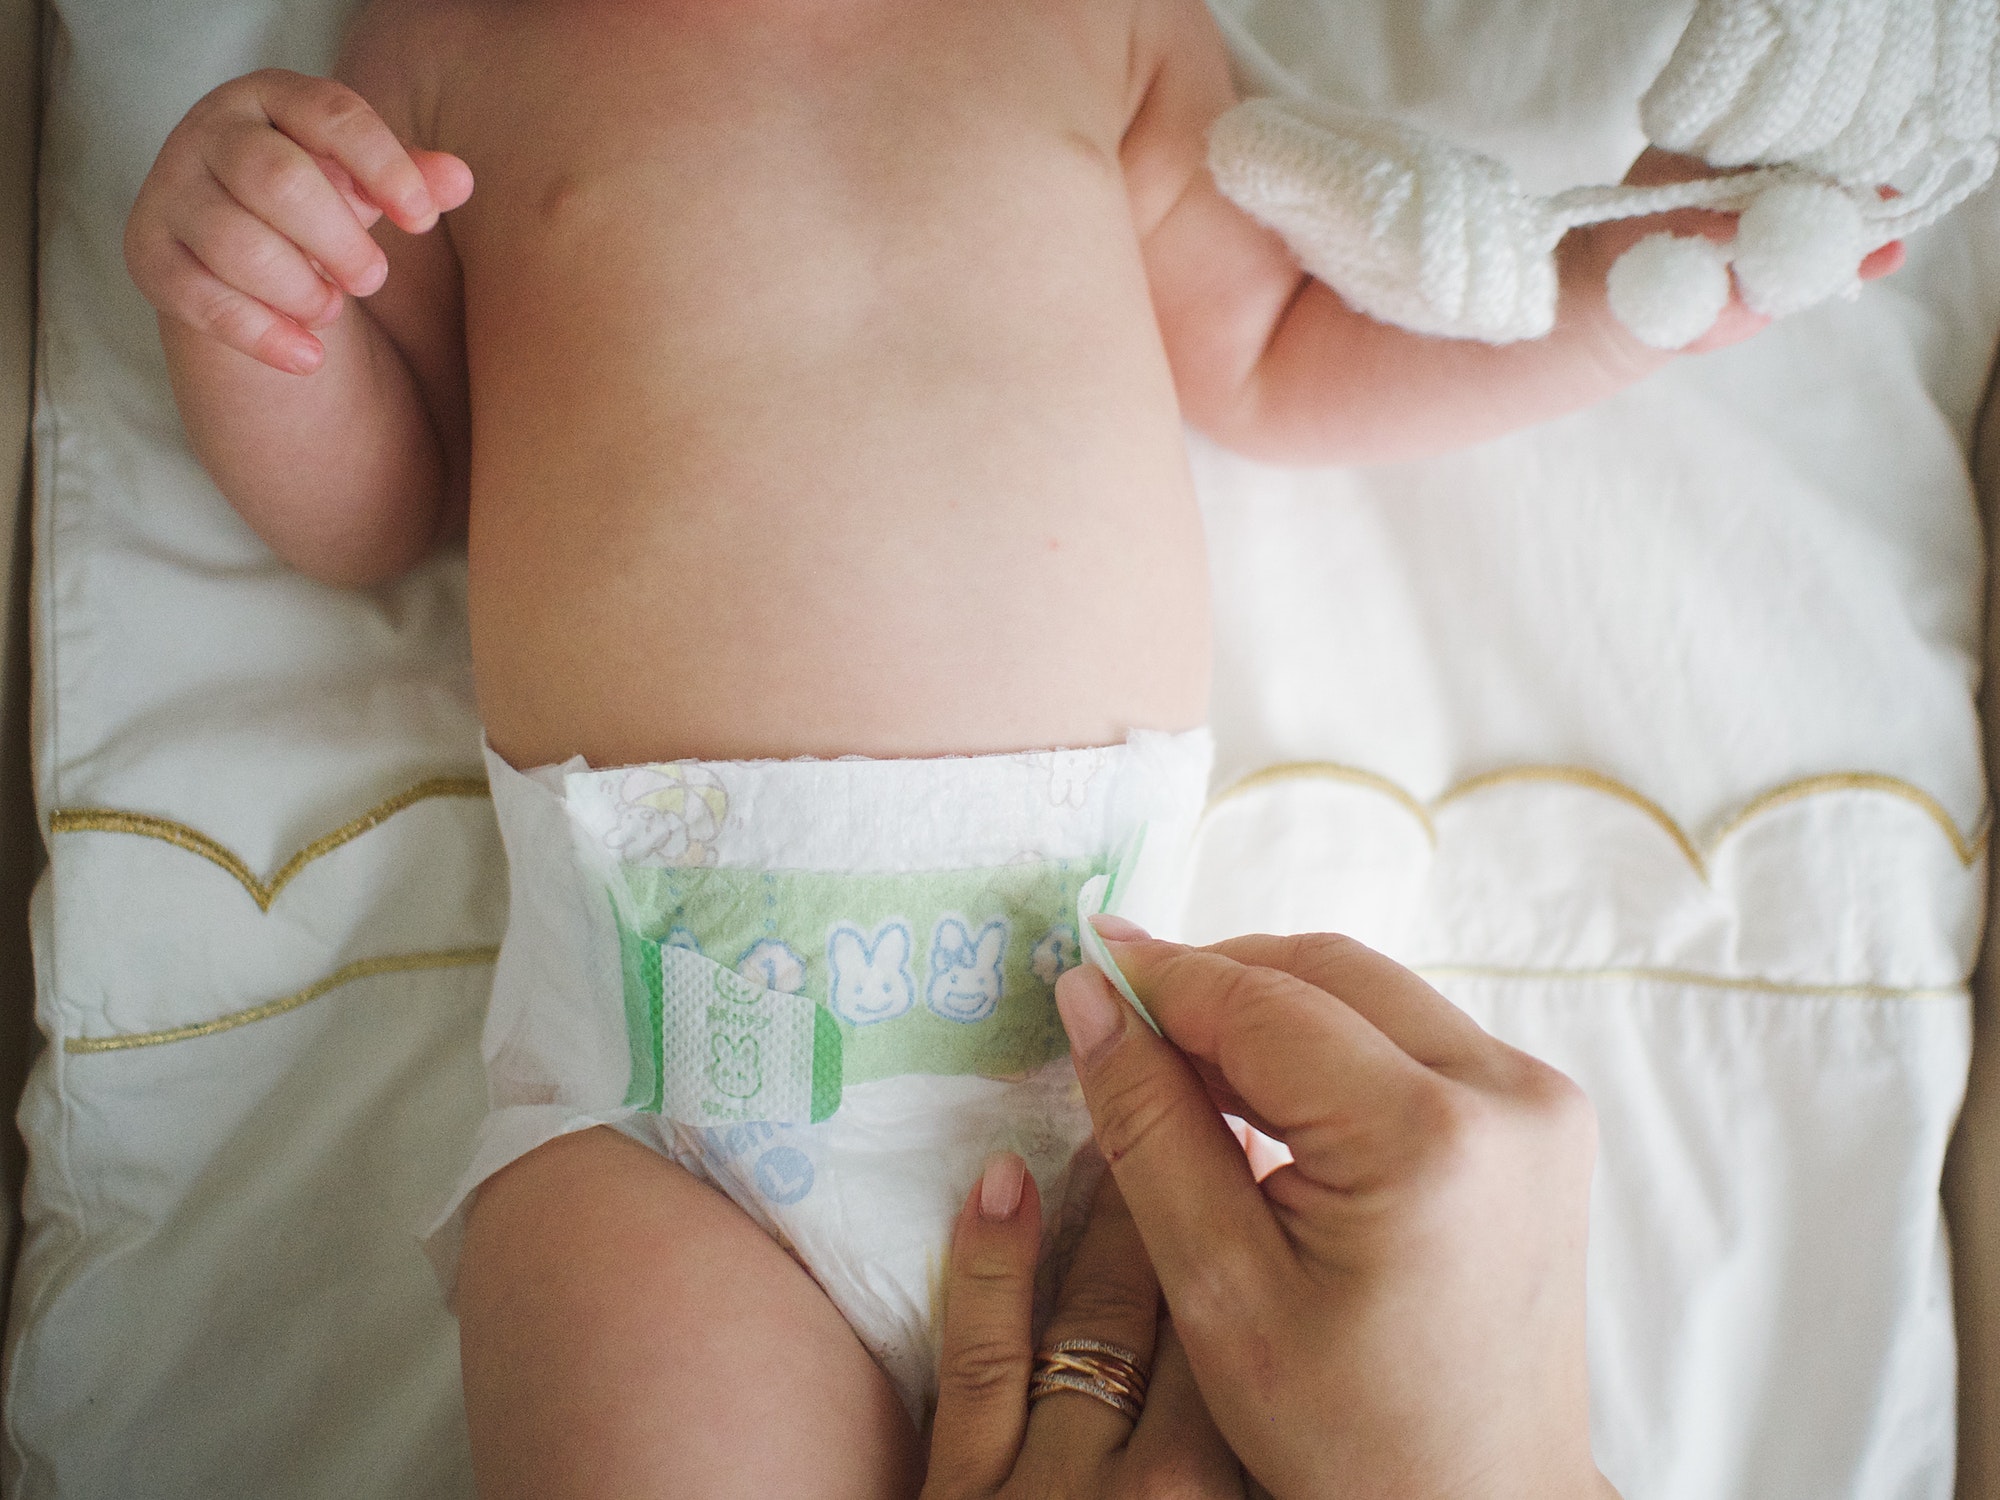 mom changes the baby's diaper